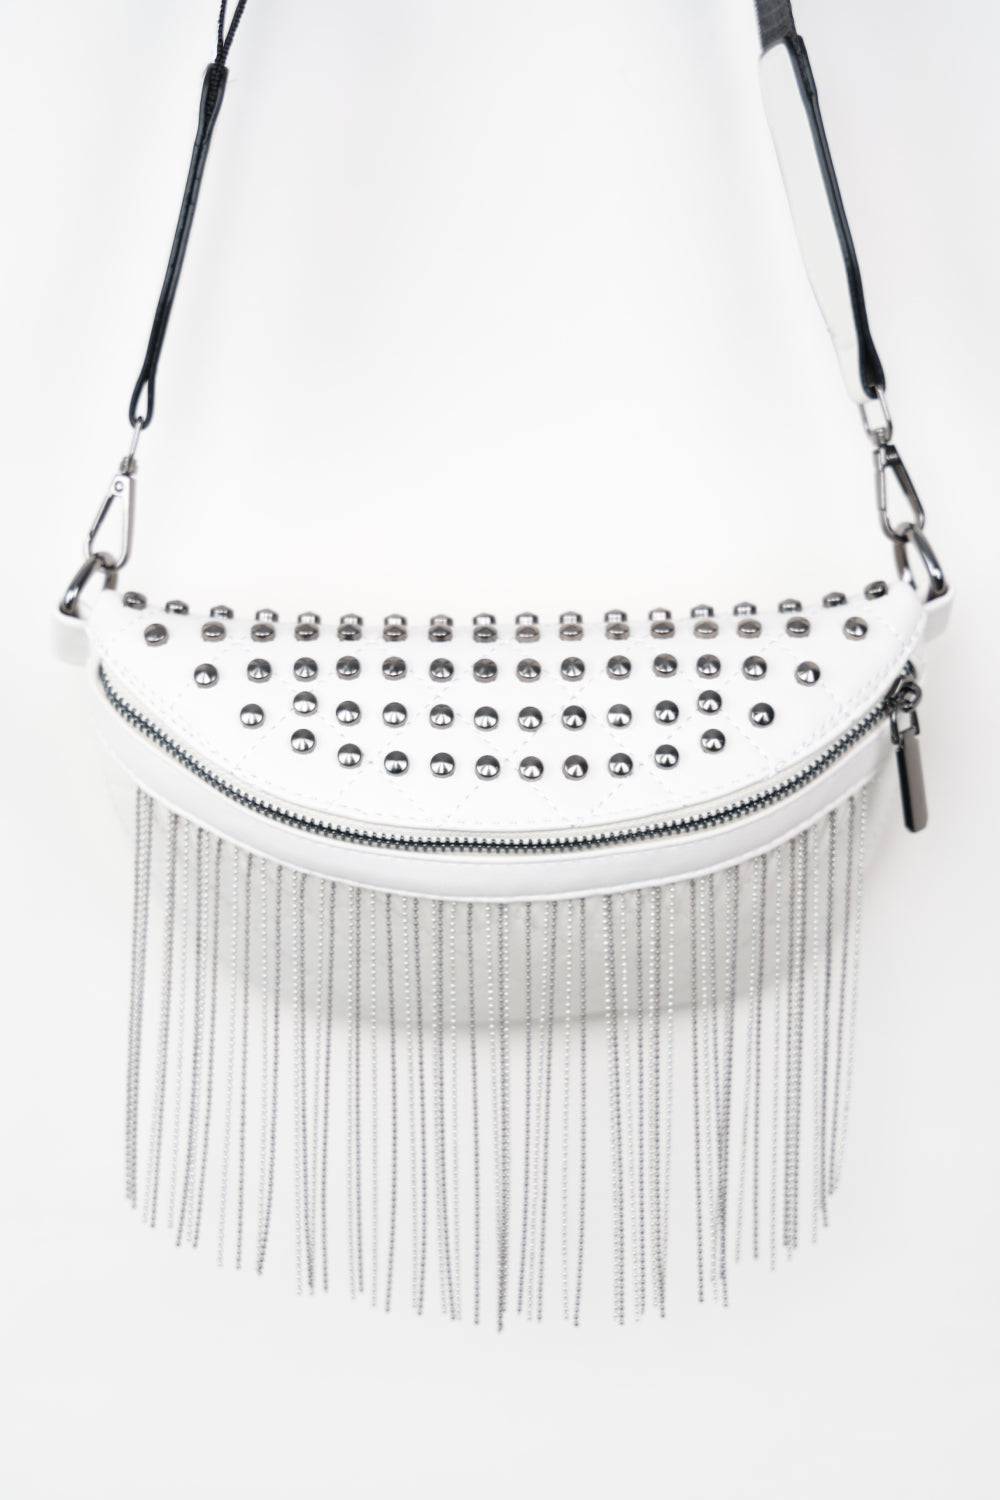 Backstage Studded Belt Bag with Fringes - Cheeky Chic Boutique